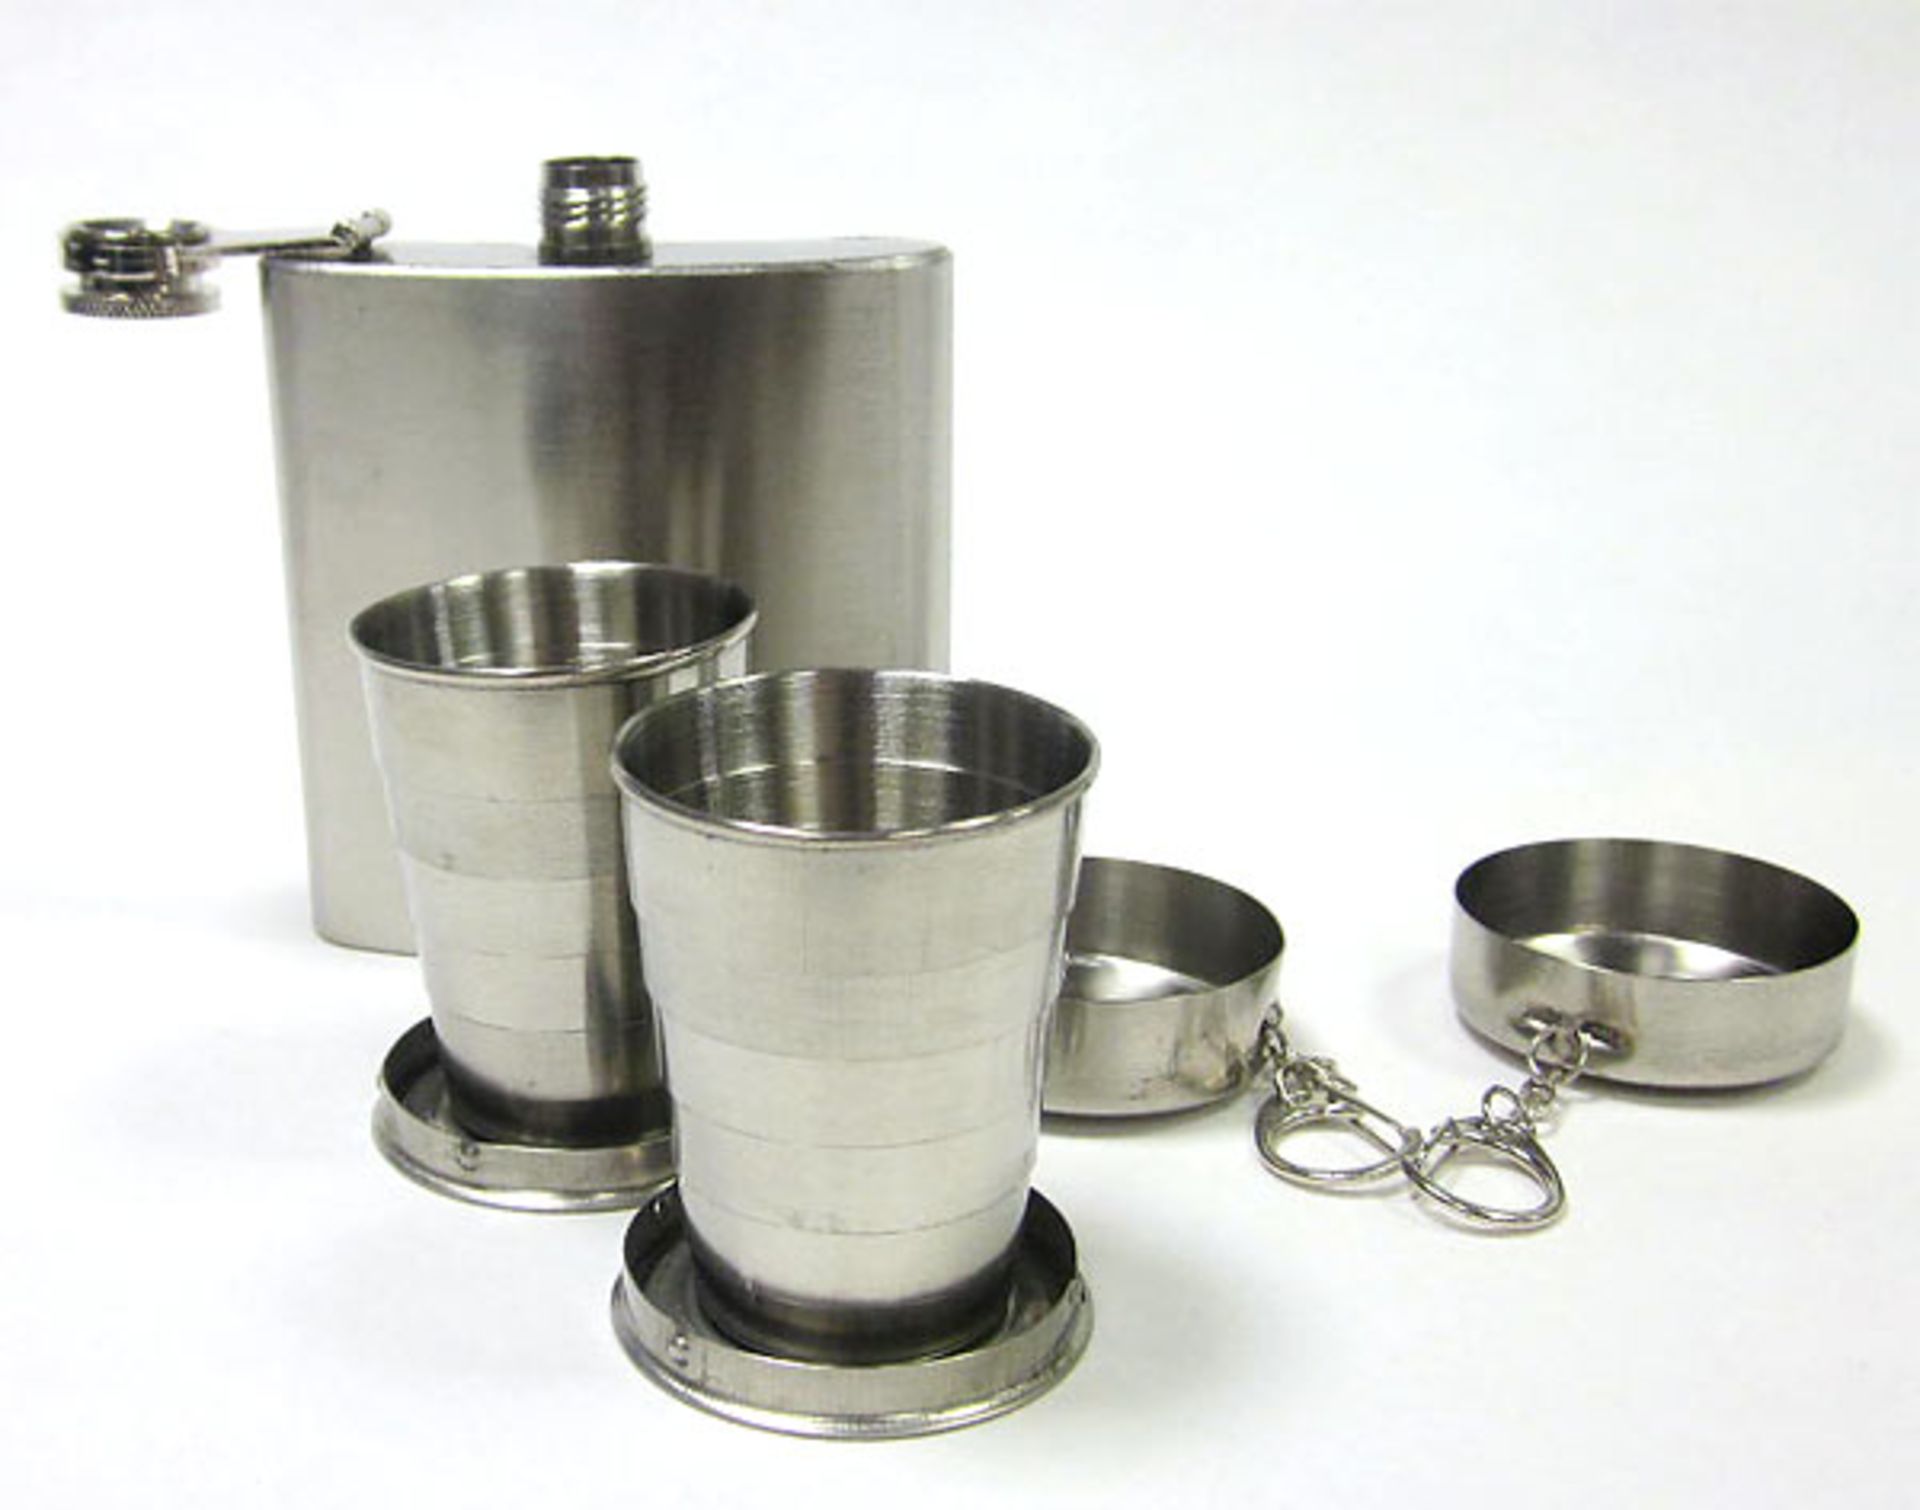 V *TRADE QTY* Brand New Stainless Steel Hip Flask And Cup Set X 4 YOUR BID PRICE TO BE MULTIPLIED BY